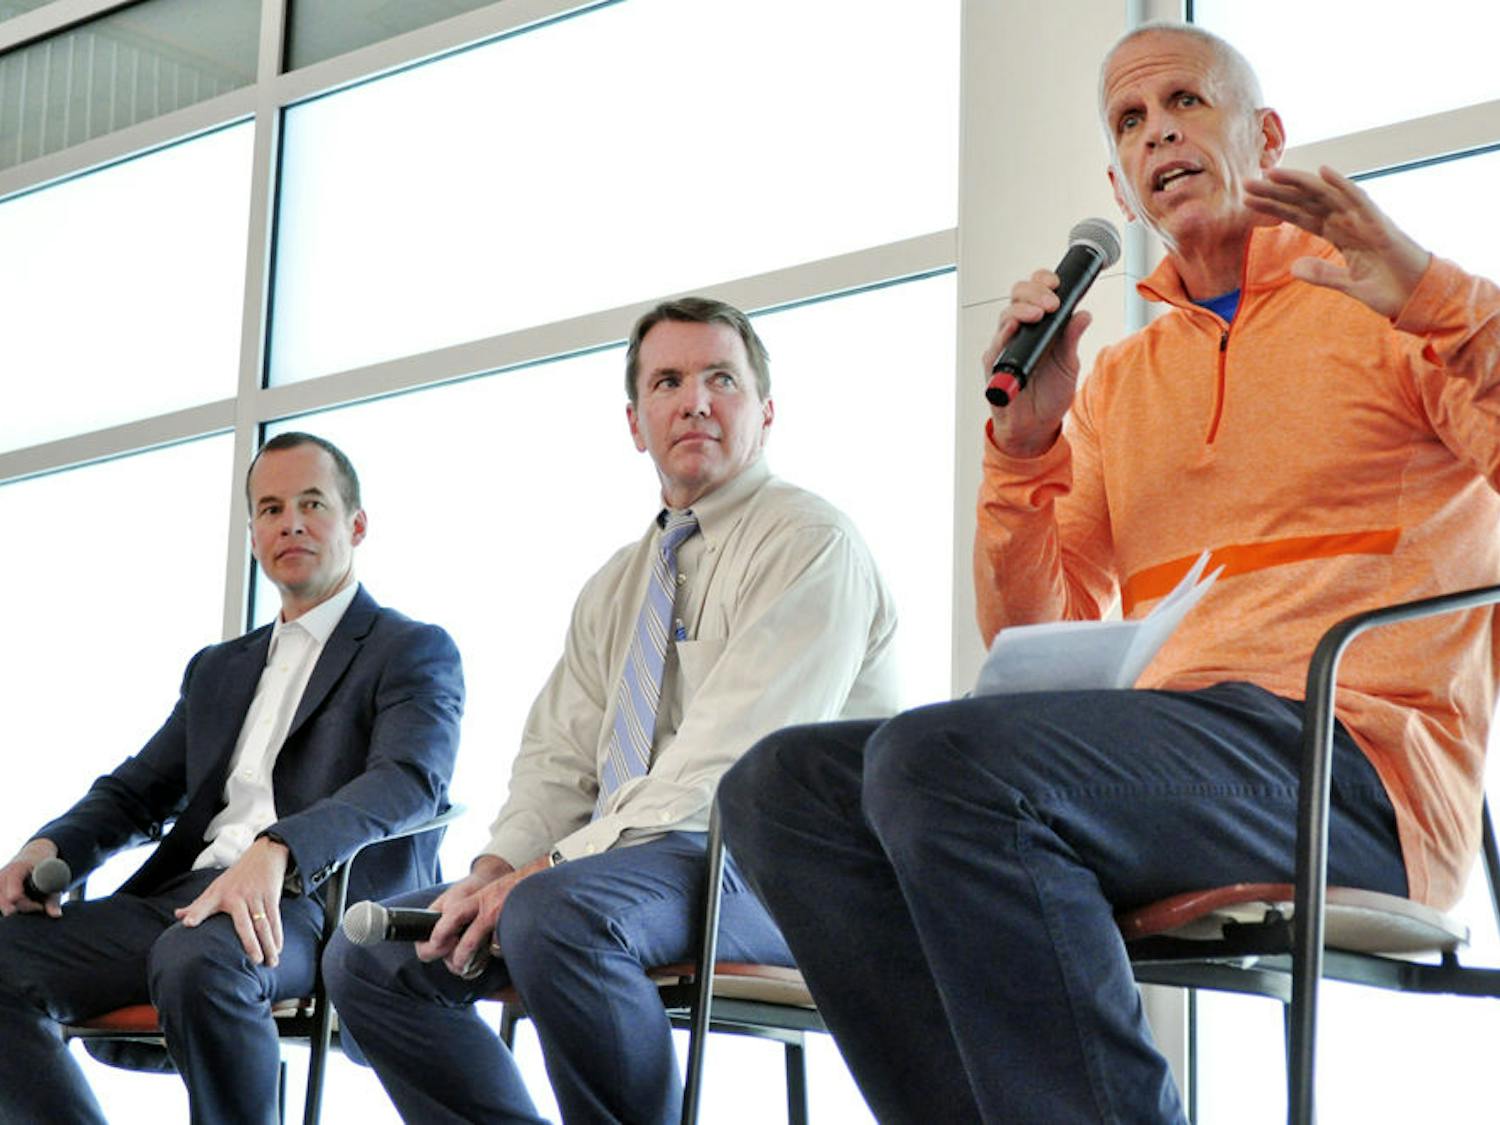 From left: Mike Hill, UAA executive associate athletics director for external affairs, and Chip Howard, executive associate athletics director for internal affairs, watch Jeremy Foley, the UF athletics director, speak about his career at an Accent Speaker’s Bureau event in the Evans Champions Club on Tuesday. “It’s not a perfect science,” he said about the process of hiring a new coach. “The fit part is really important. The honesty and integrity part is really important.”